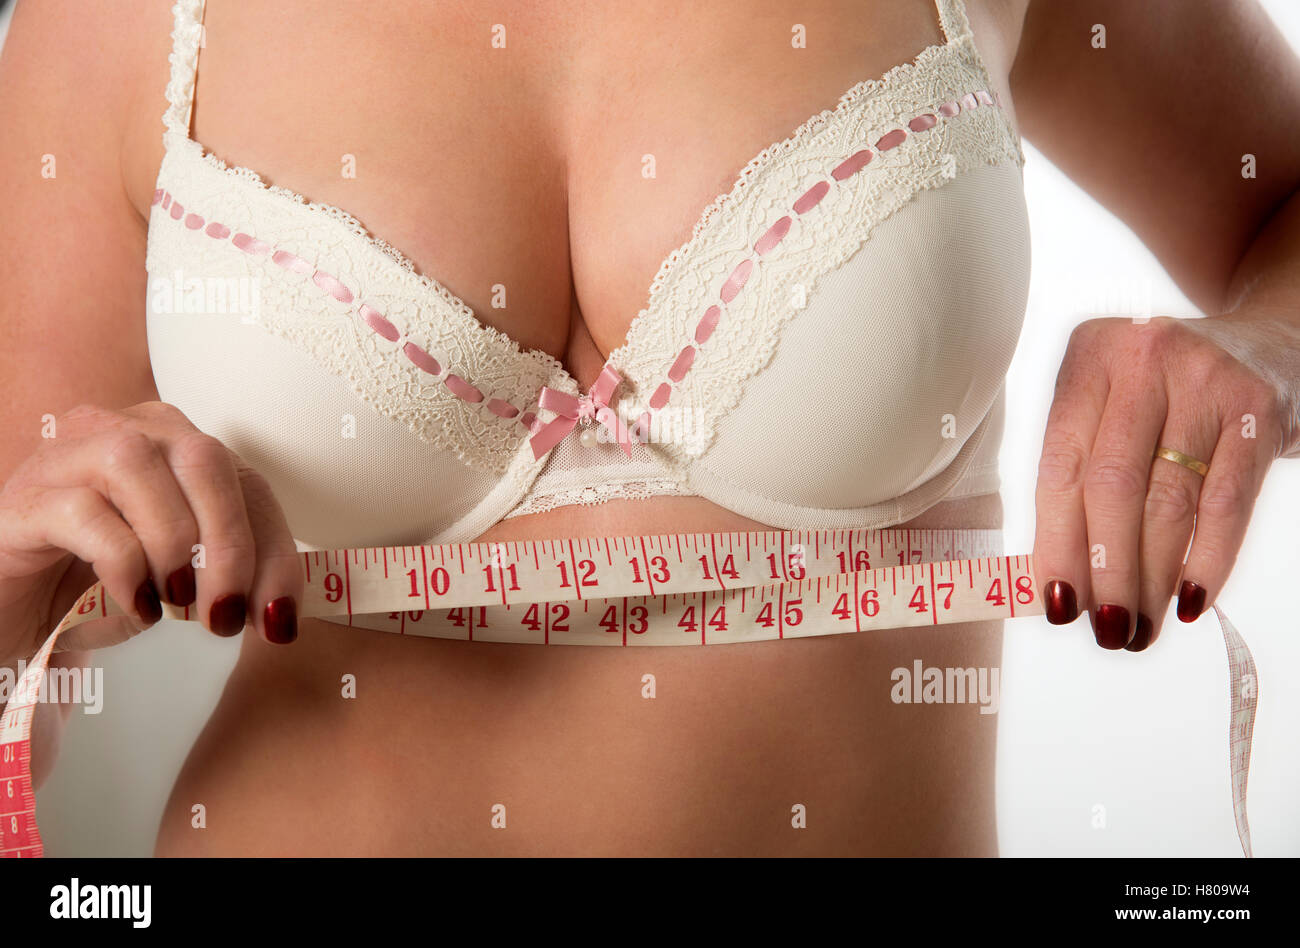 Middle aged woman checking under bra measurement using a tape measure Stock  Photo - Alamy